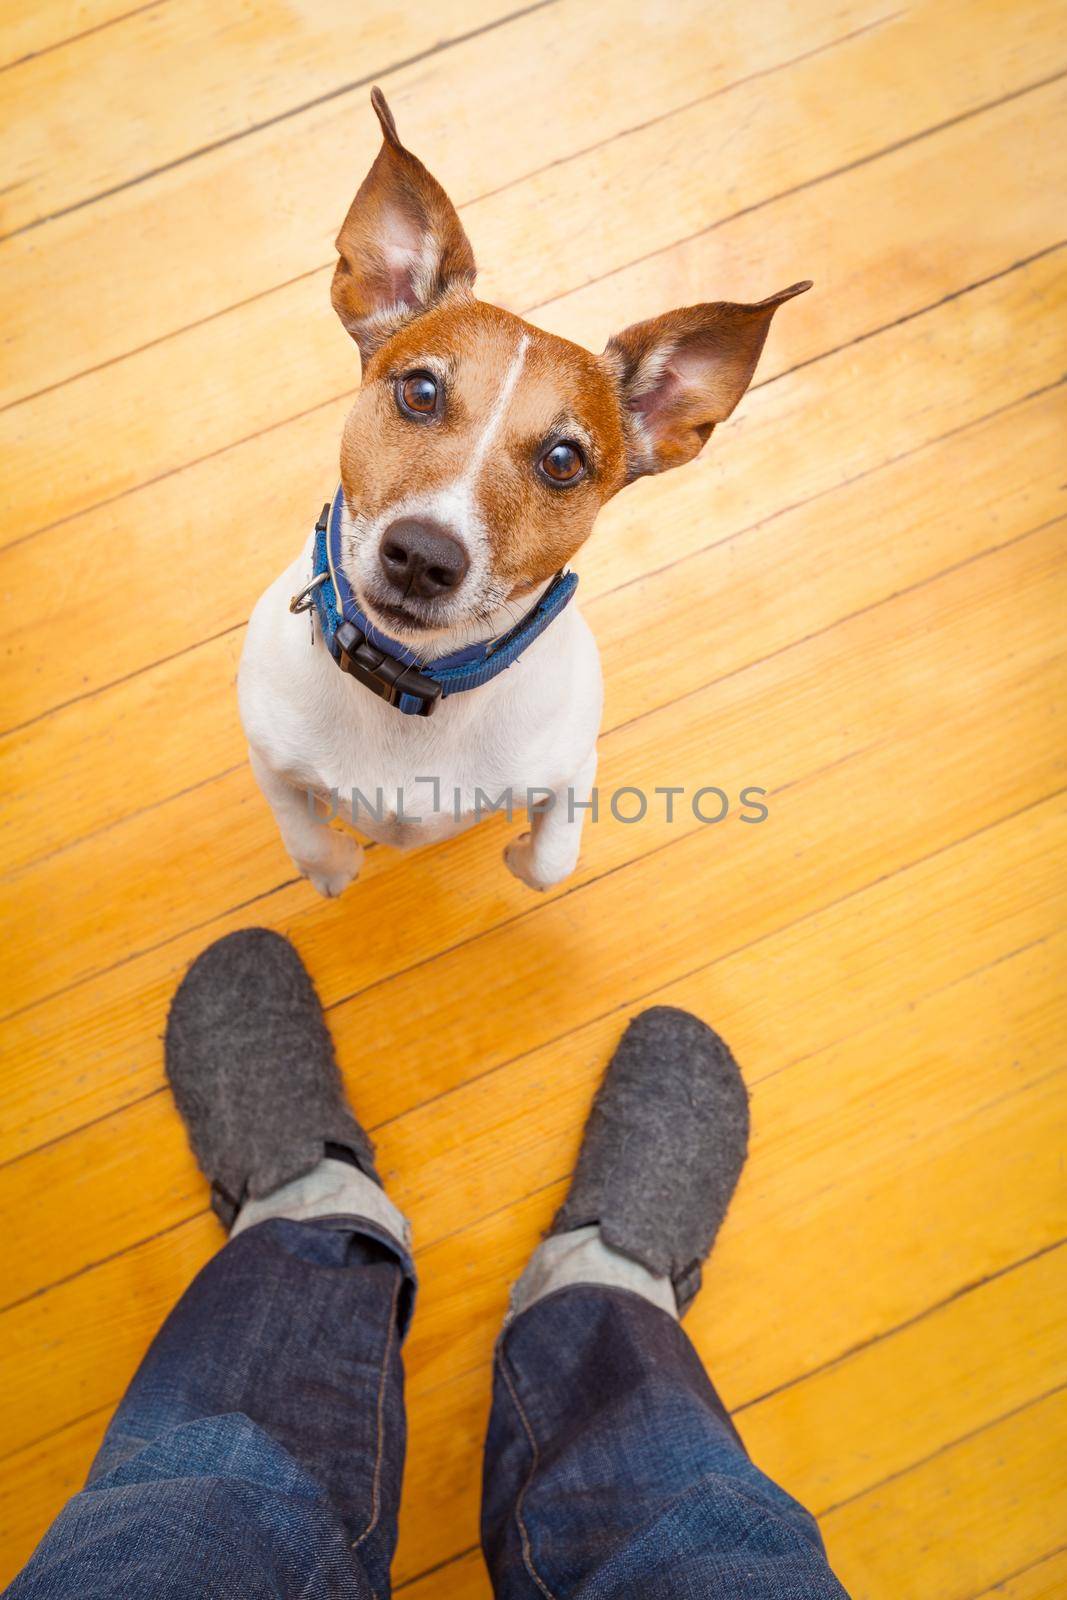 jack russell dog ready for a walk with owner begging, sitting and waiting ,on the floor inside their home